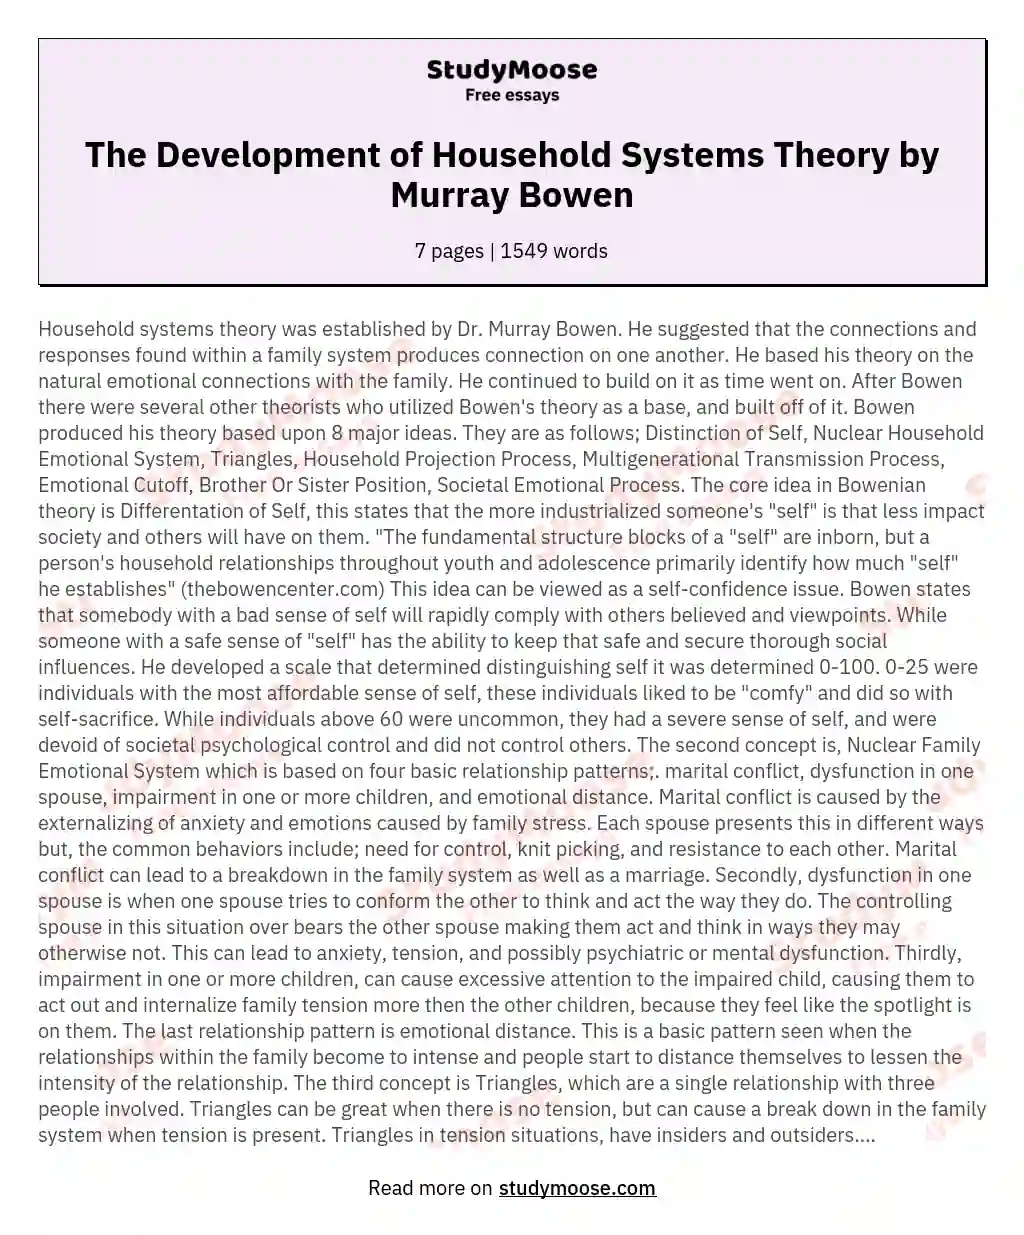 The Development of Household Systems Theory by Murray Bowen essay